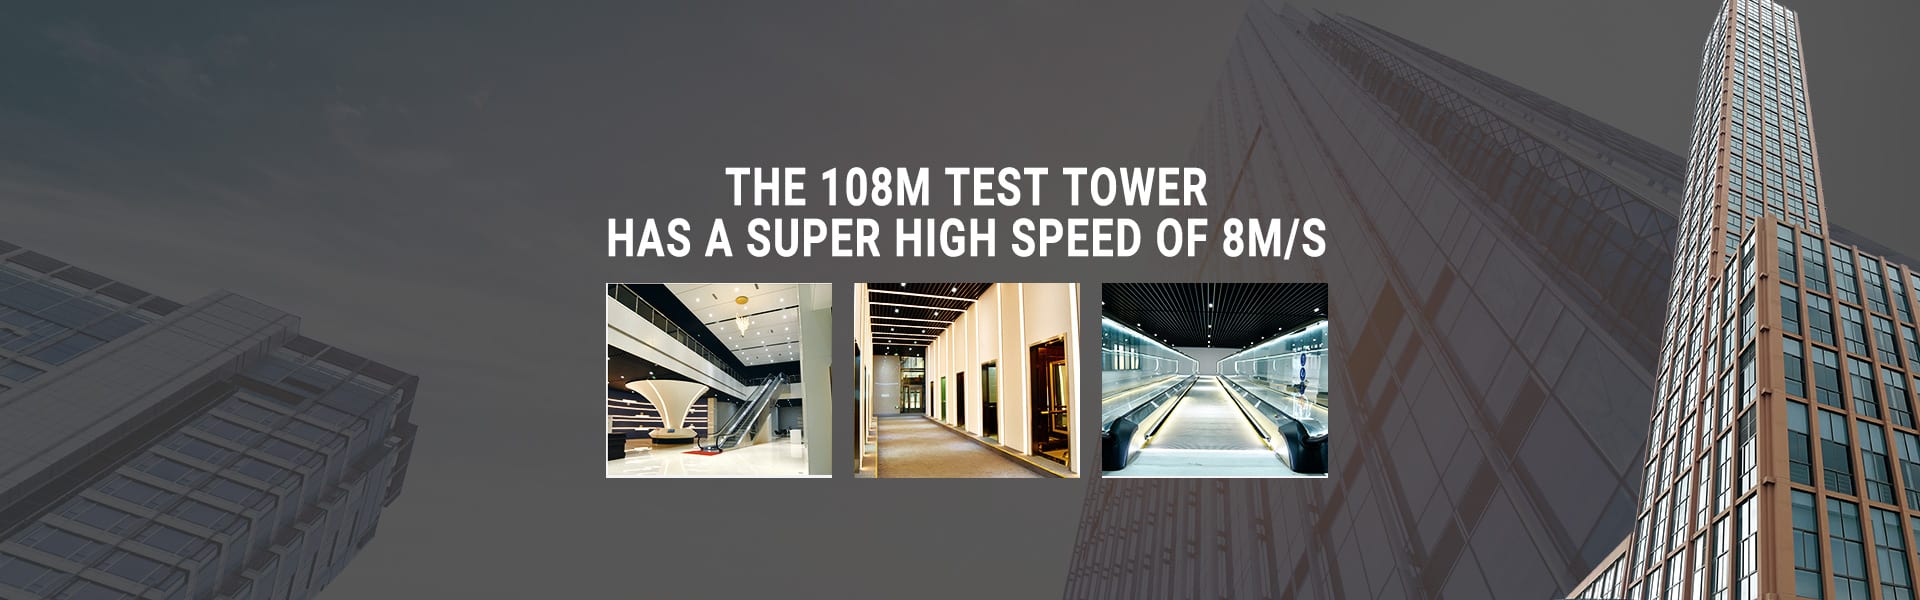 The 108m test tower